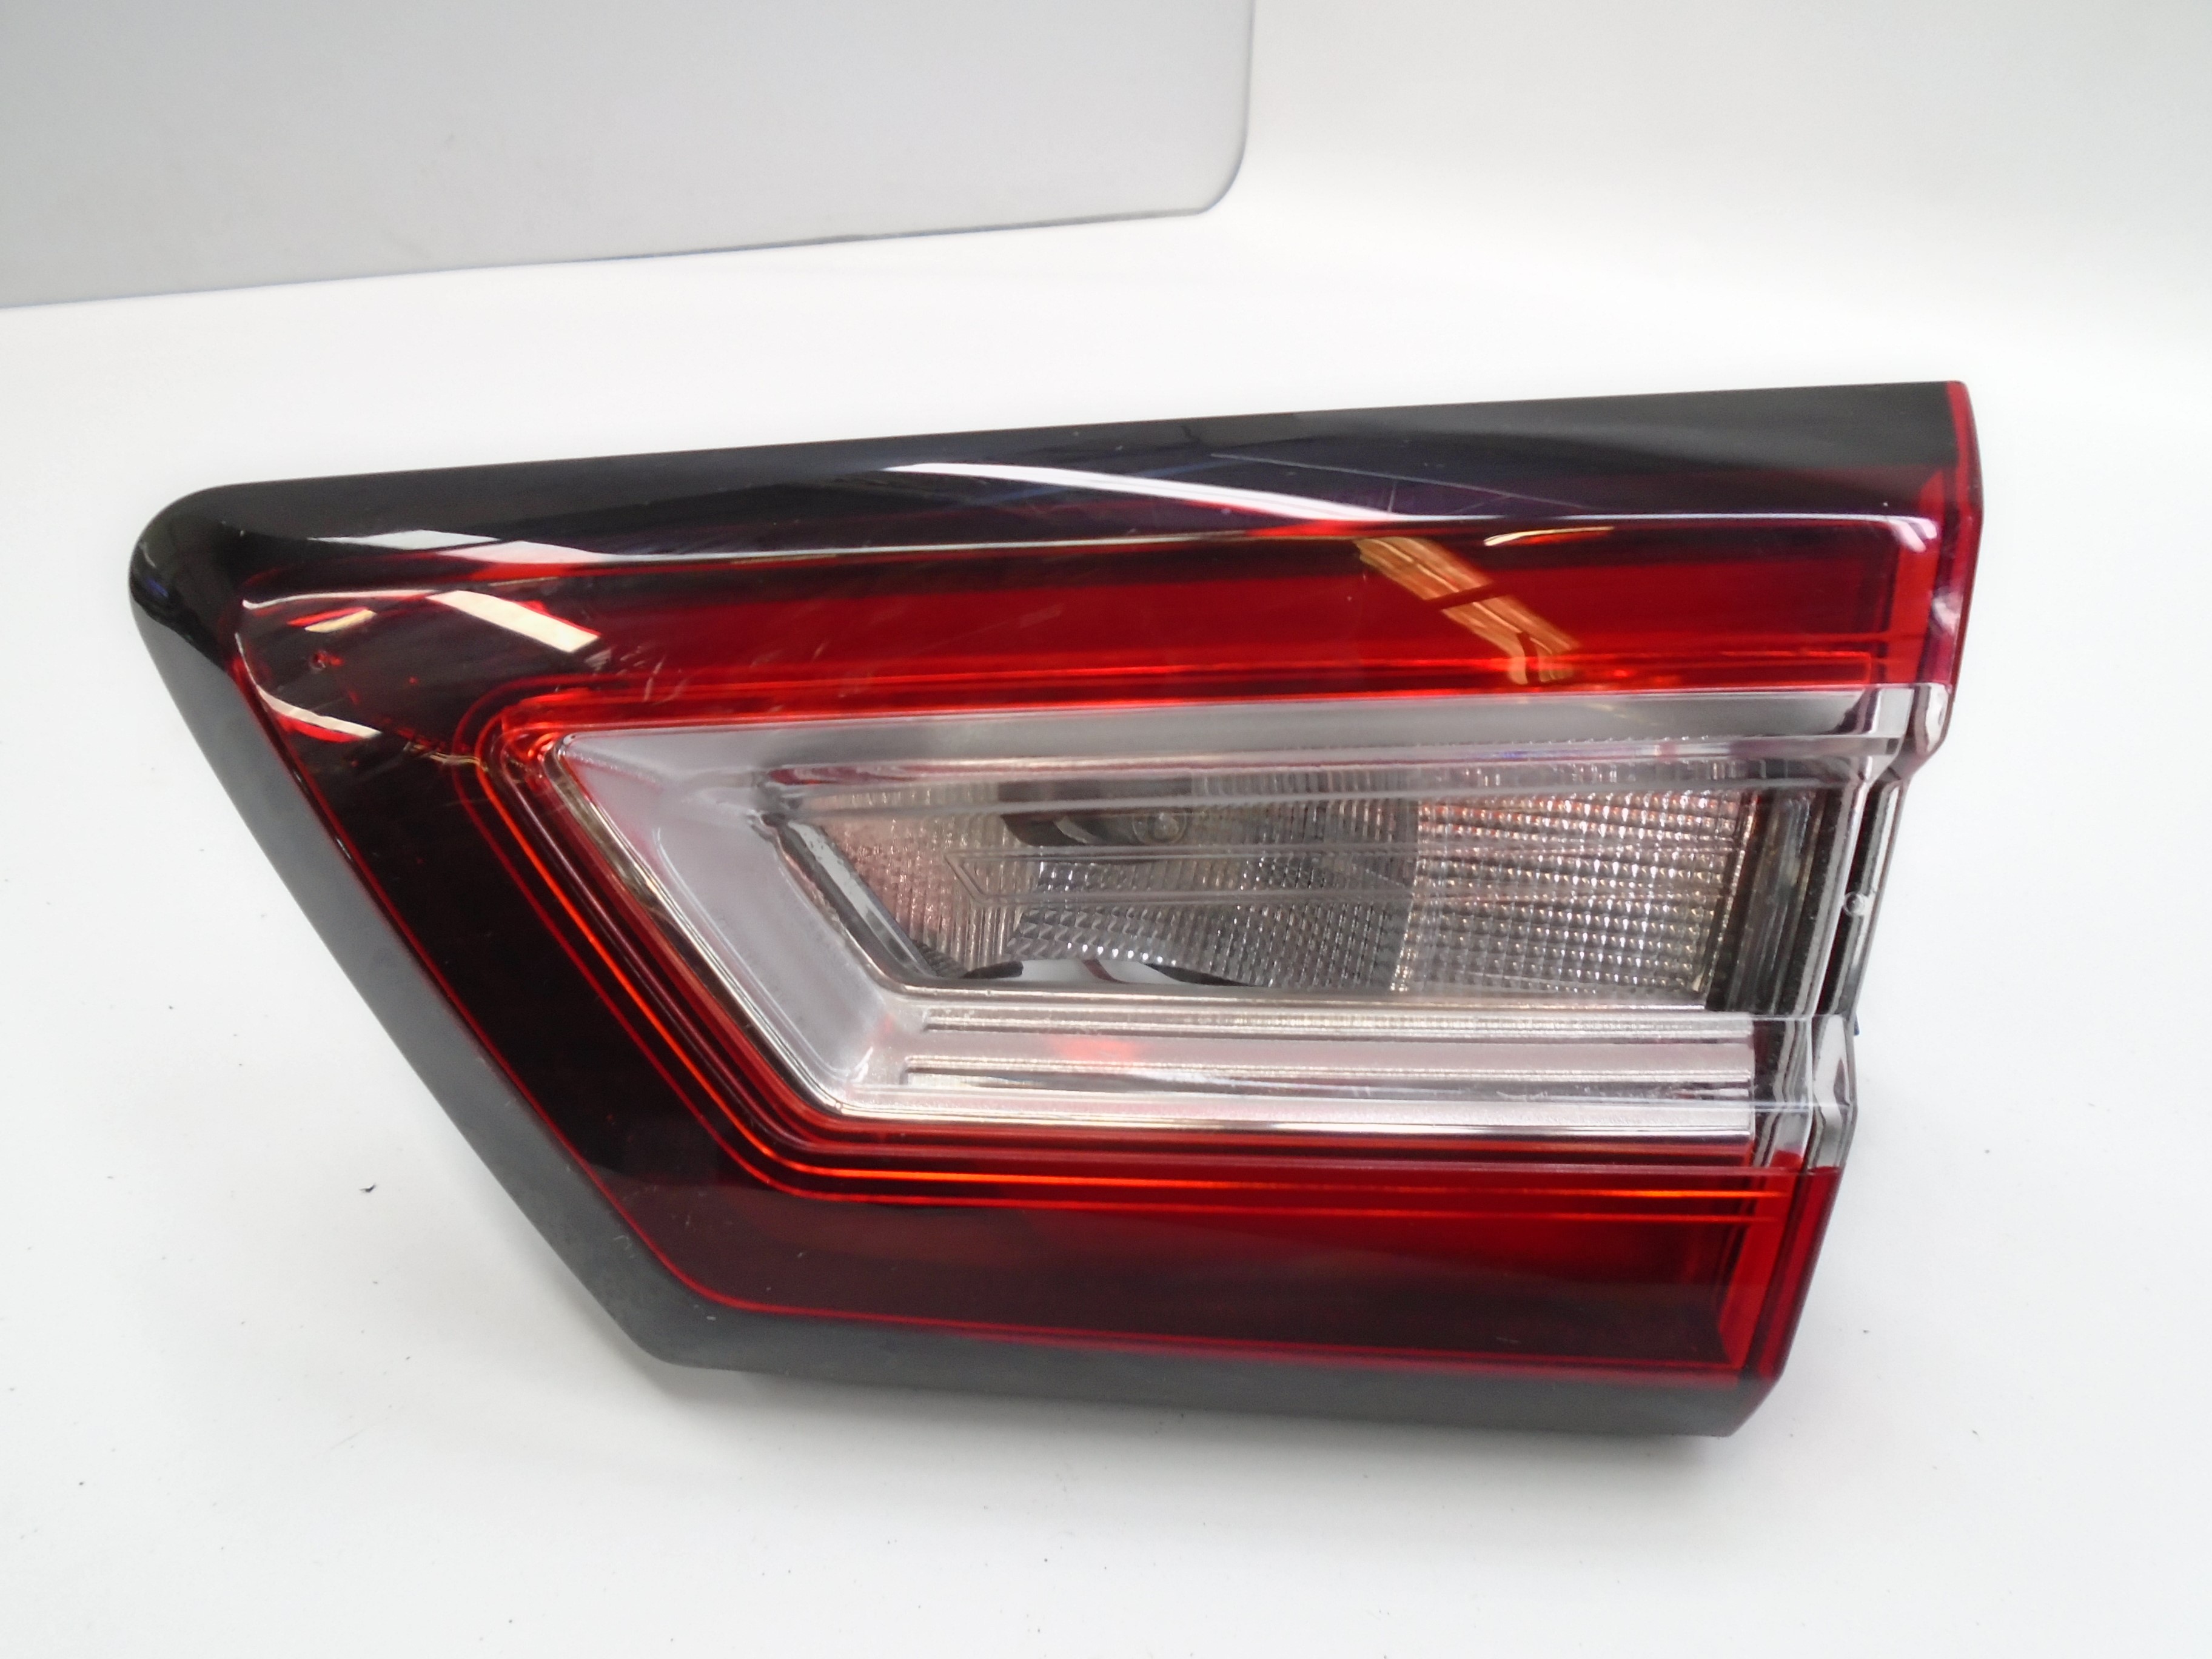 RENAULT Clio 3 generation (2005-2012) Rear Right Taillight Lamp 265505796R 25200722